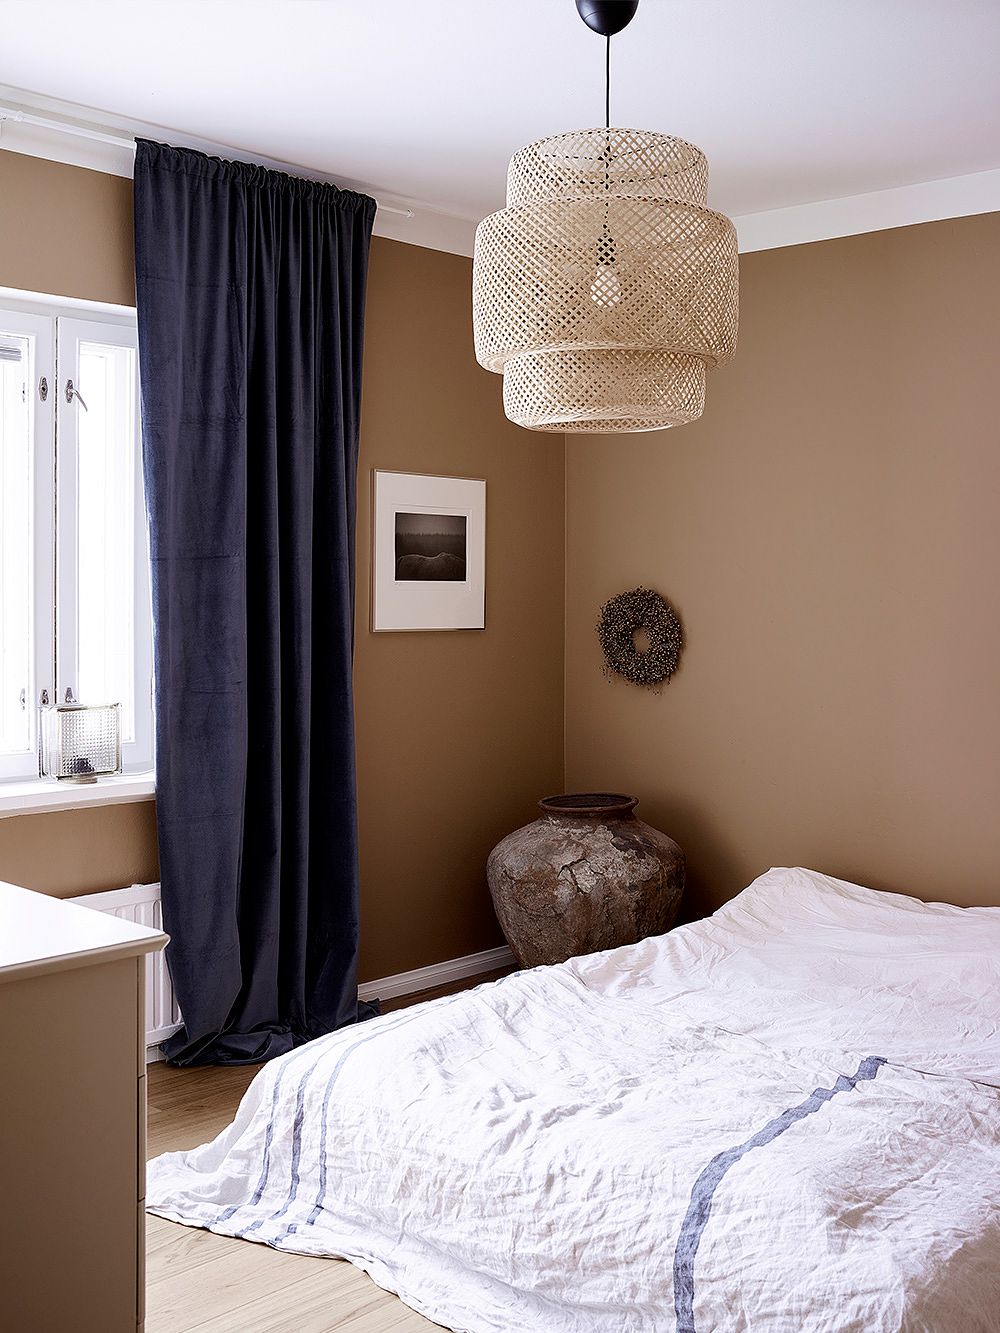 Interior with paint color Tikkurila Toffee V396